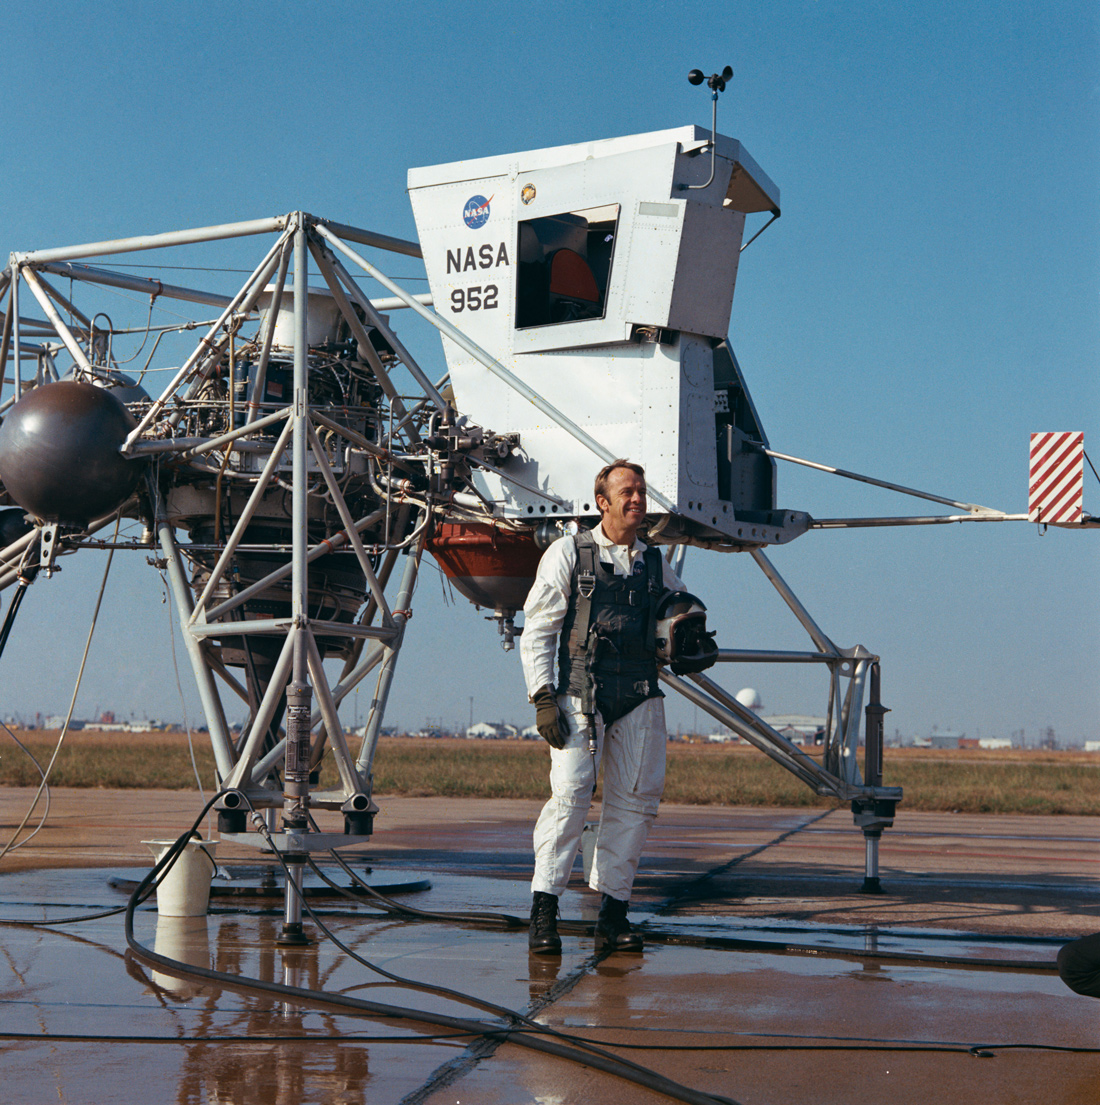 Astronaut standing next to training vehicle, smiling, on wet pavement, under a blue sky.